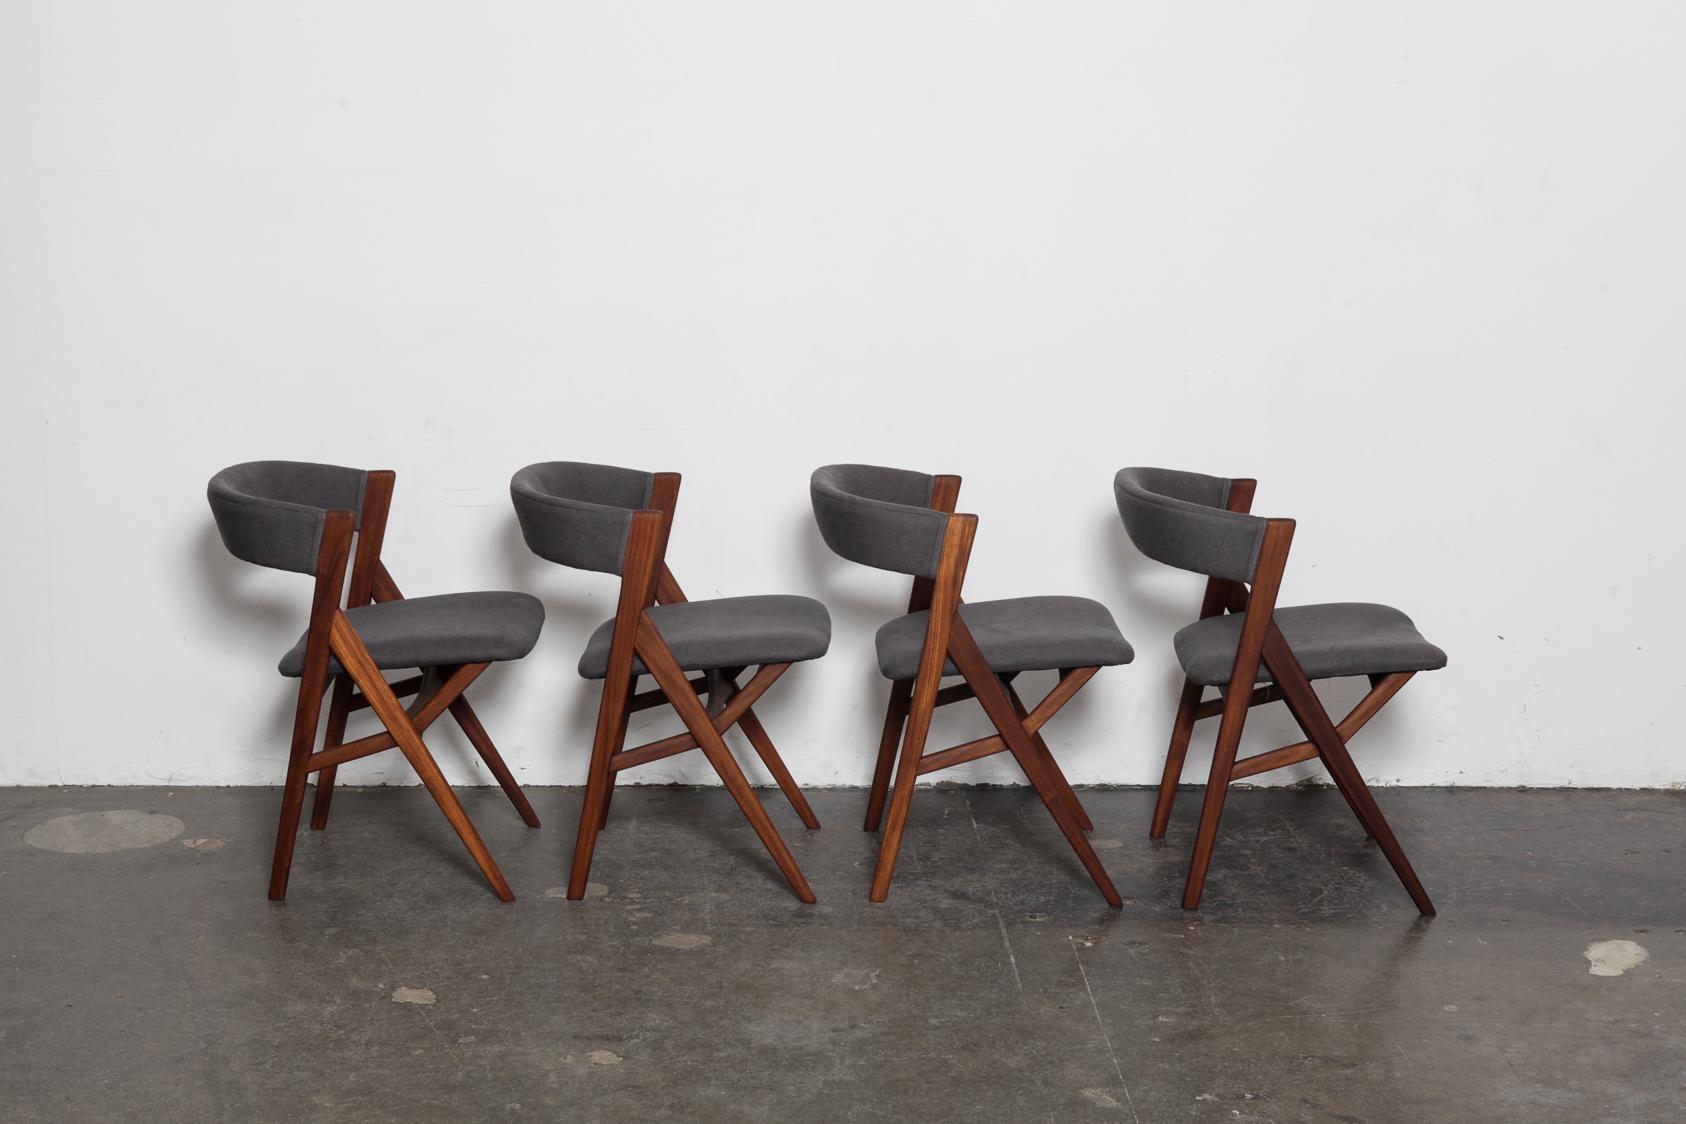 Danish Mid-Century Modern 1950s wraparound curved back teak dining chairs with 'A' frame and upholstered back and seat. These have been newly refinished in a natural teak oil finish and have been upholstered in a dark grey heavy linen fabric.